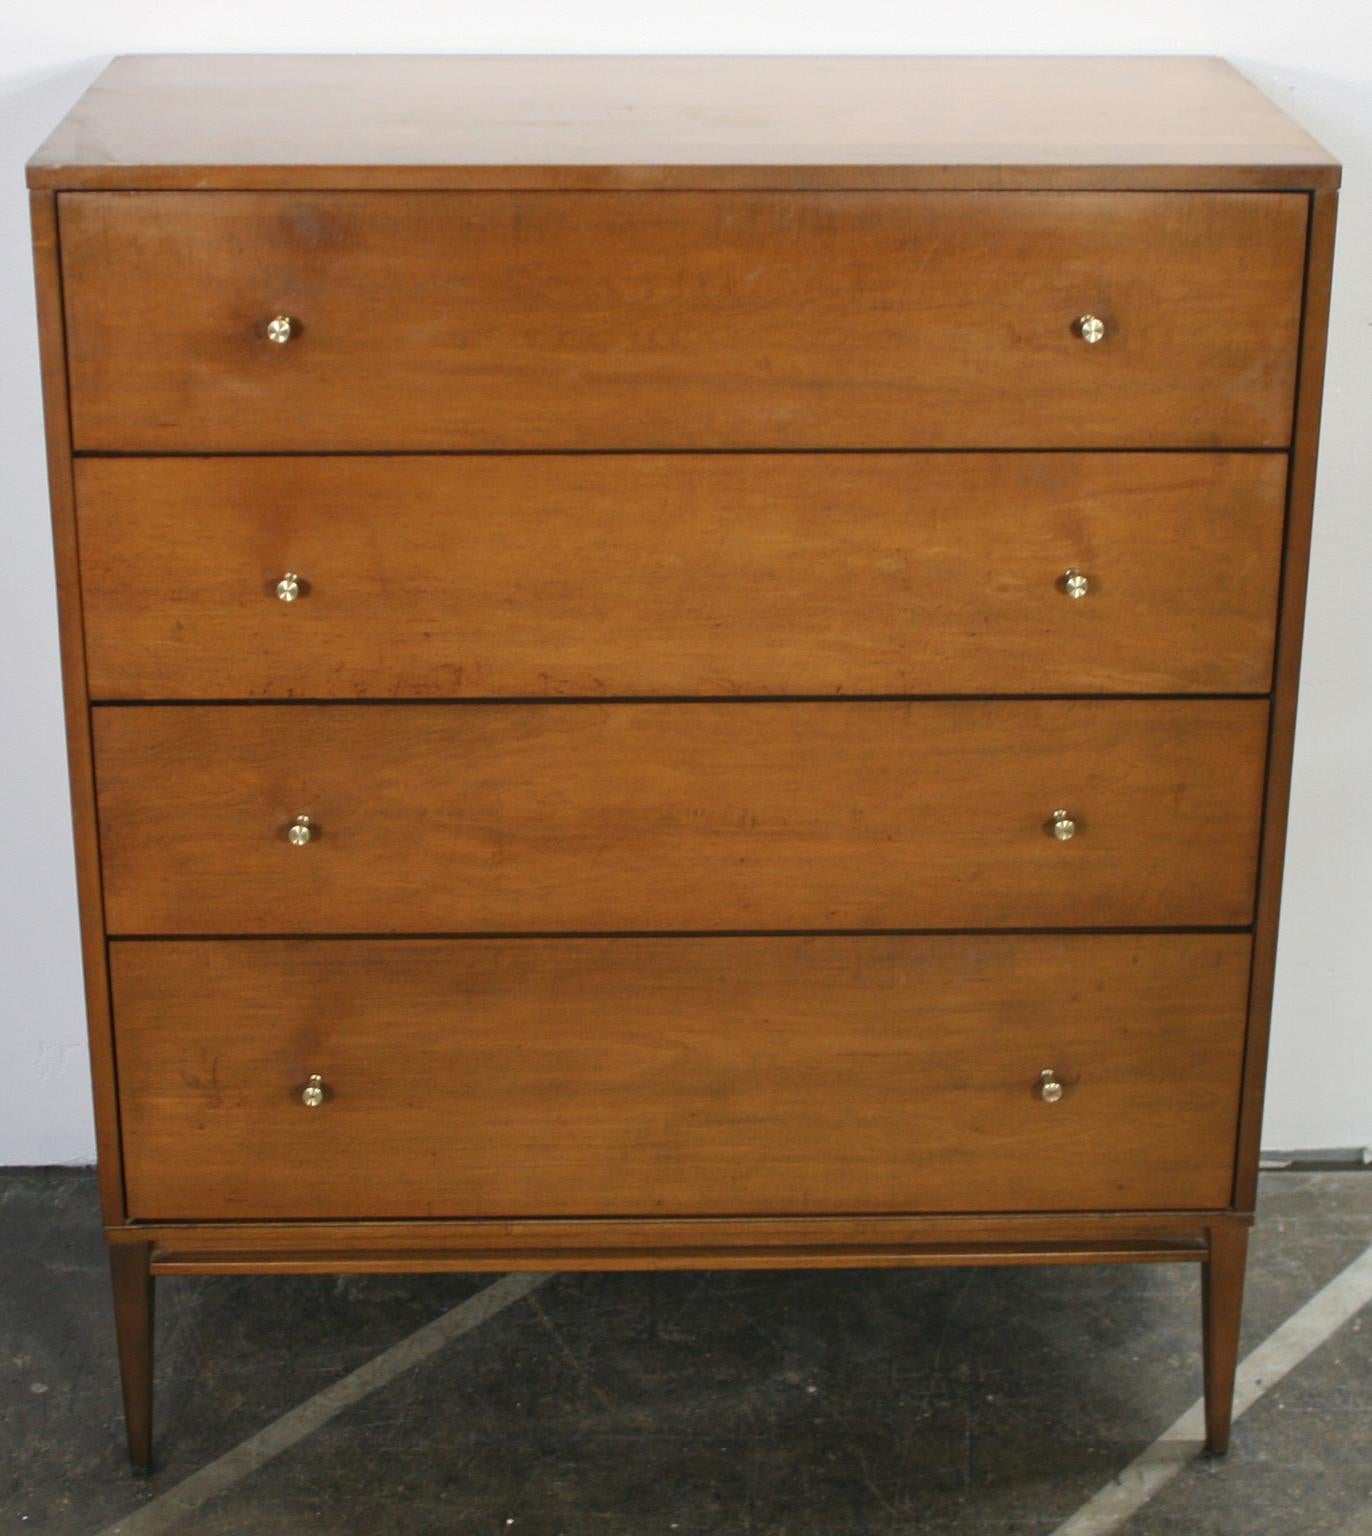 Beautiful midcentury tall dresser 4-drawer dresser by Paul McCobb circa 1950 Planner Group #1501 with 4 center drawers. Solid maple construction has a beautiful walnut stain. All original brass cone pulls polished. Sits on 4 solid maple legs with